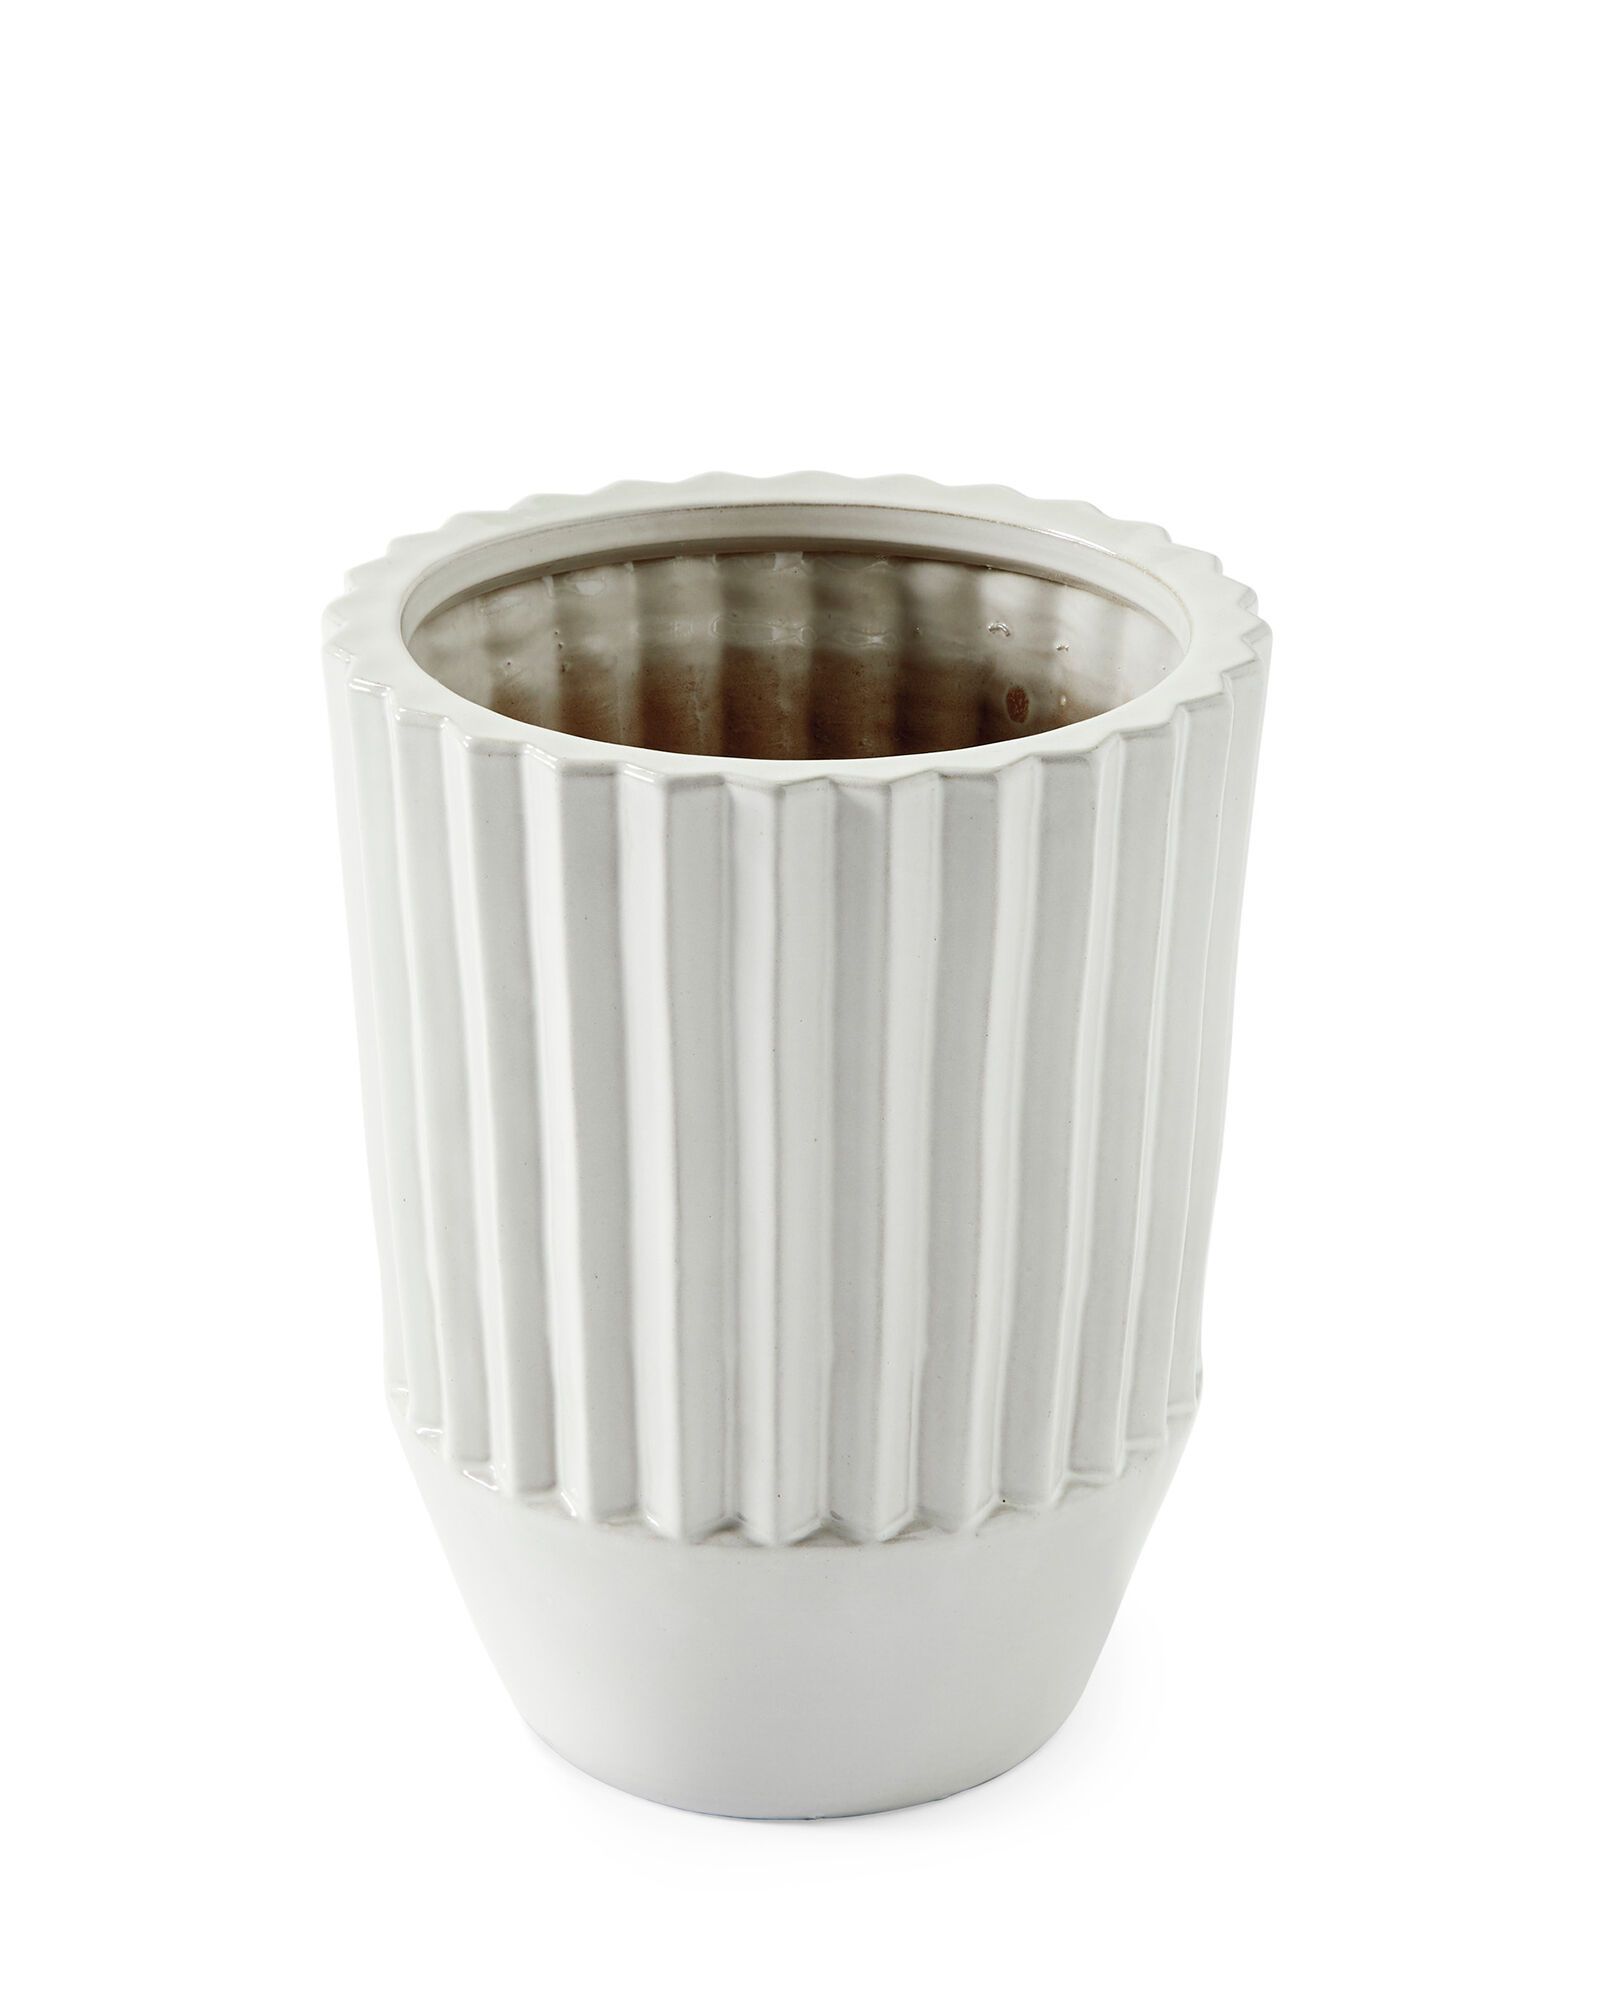 Fluted Planter | Serena and Lily